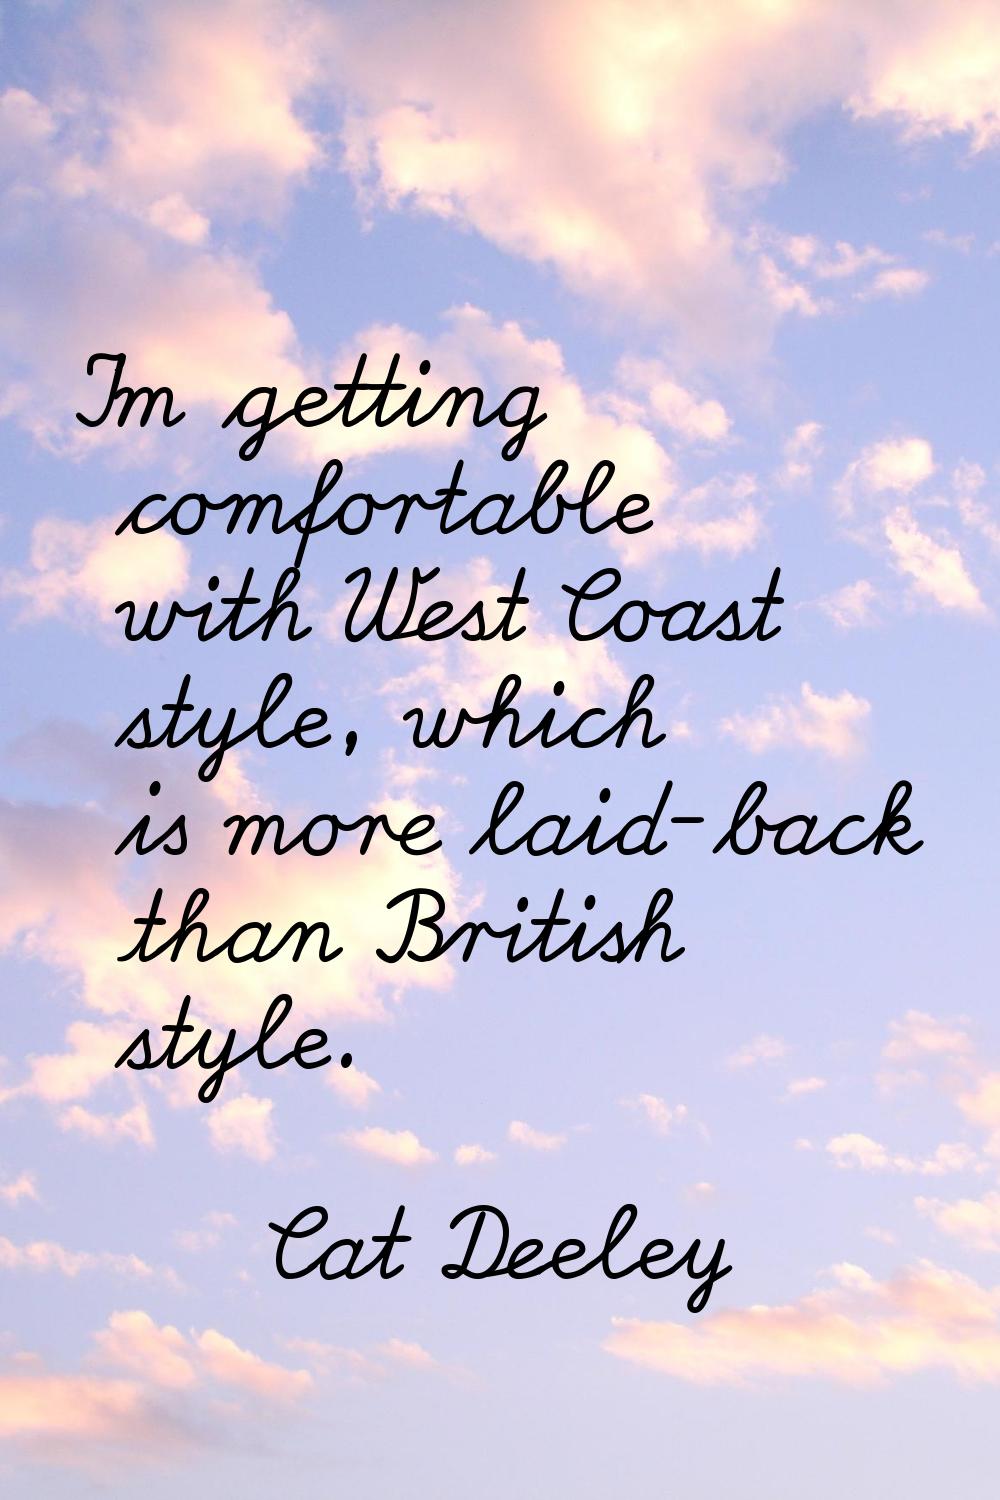 I'm getting comfortable with West Coast style, which is more laid-back than British style.